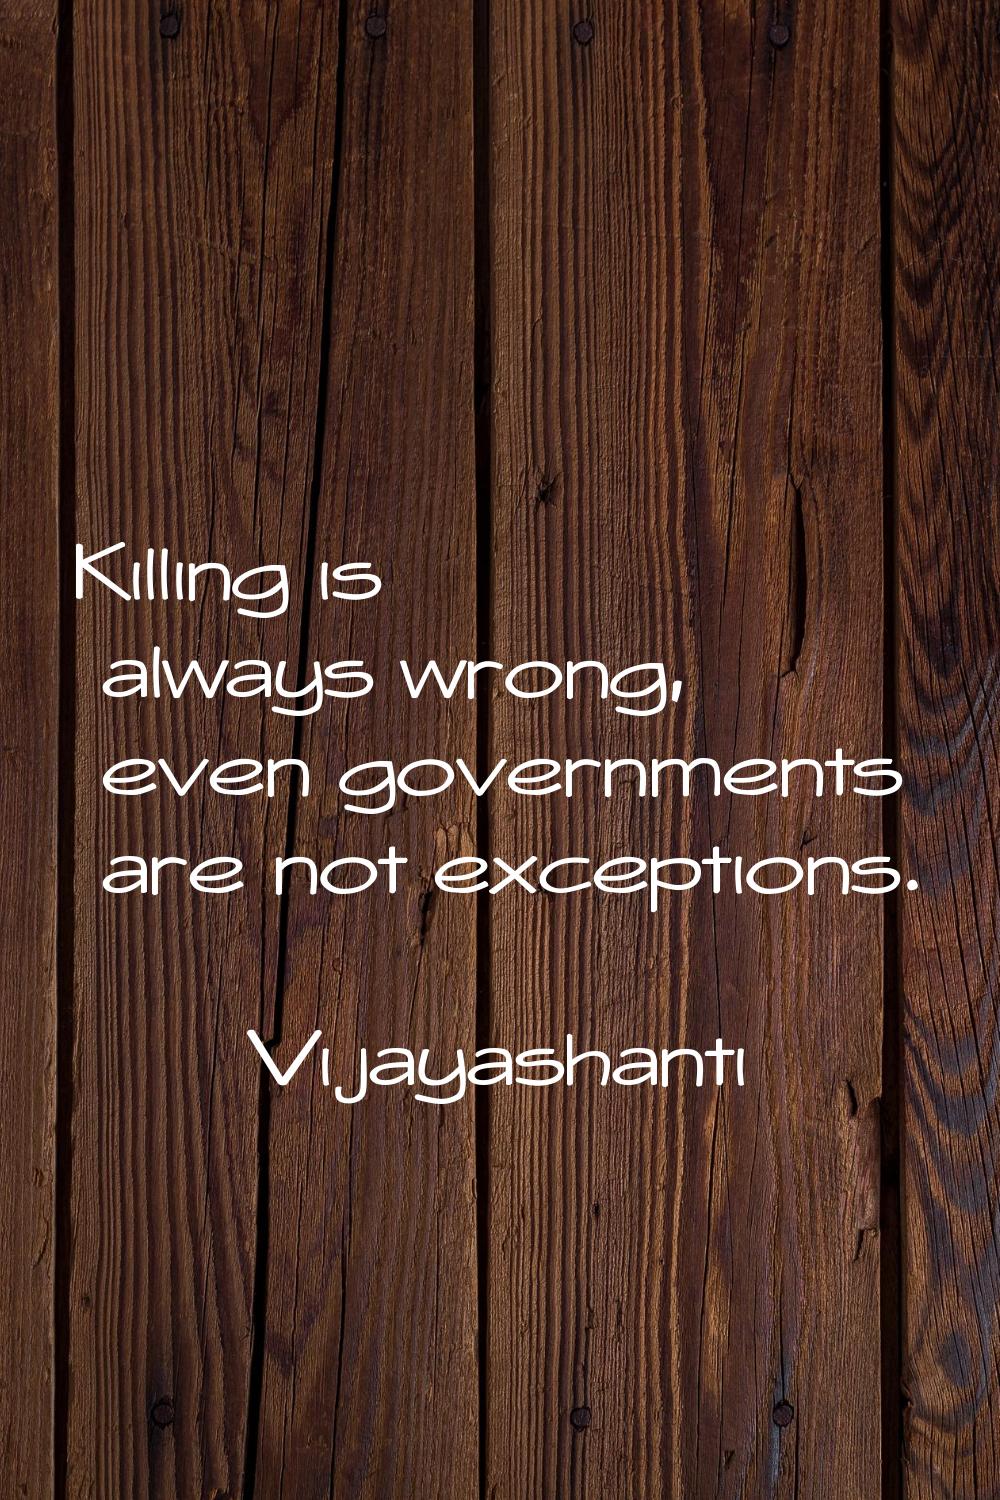 Killing is always wrong, even governments are not exceptions.